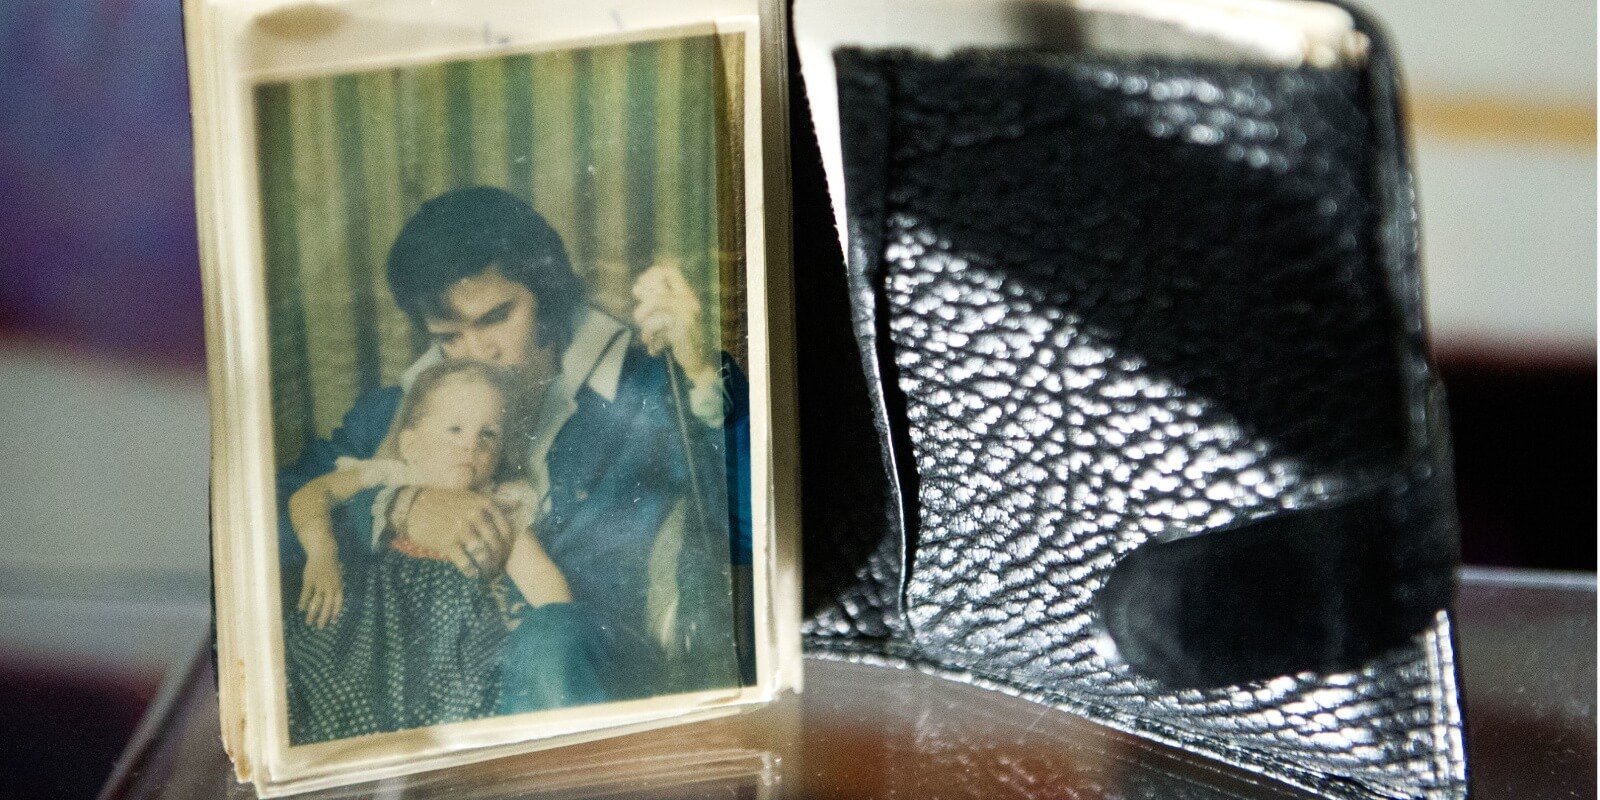 Elvis Presley's wallet contained a photograph of he and Lisa Marie Presley.